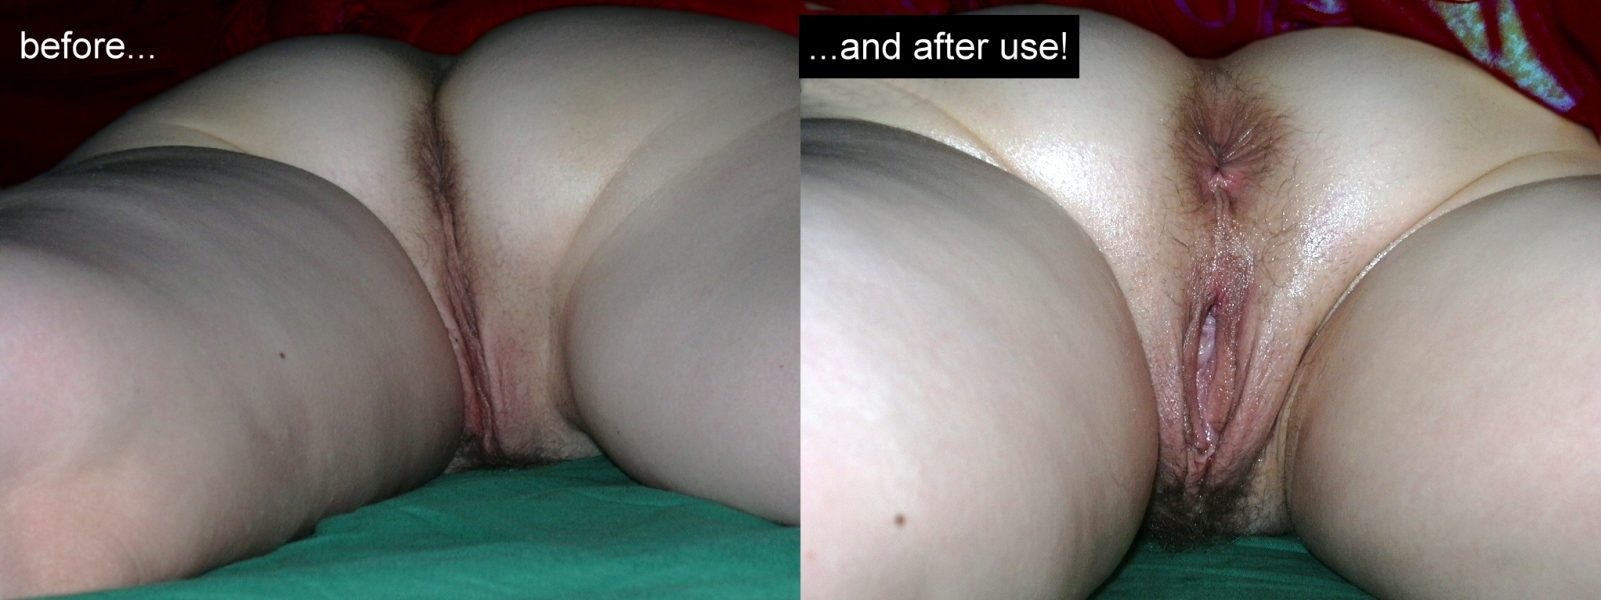 Before and after the use... image picture